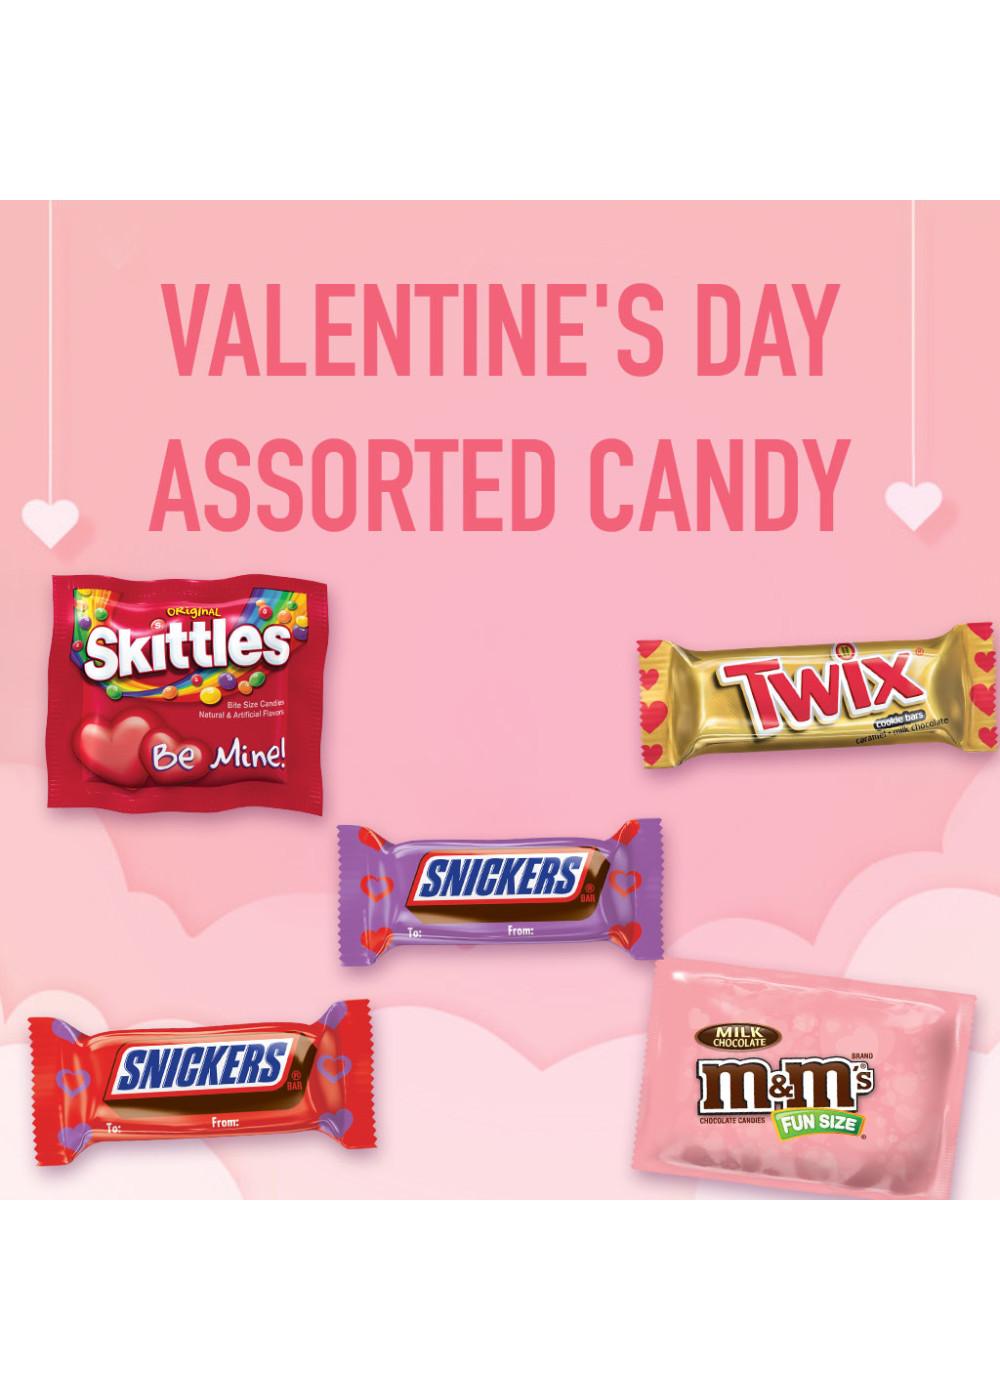 M&M'S, Snickers, Skittles, & Twix Assorted Fun Size Valentine Exchange Candy; image 4 of 7